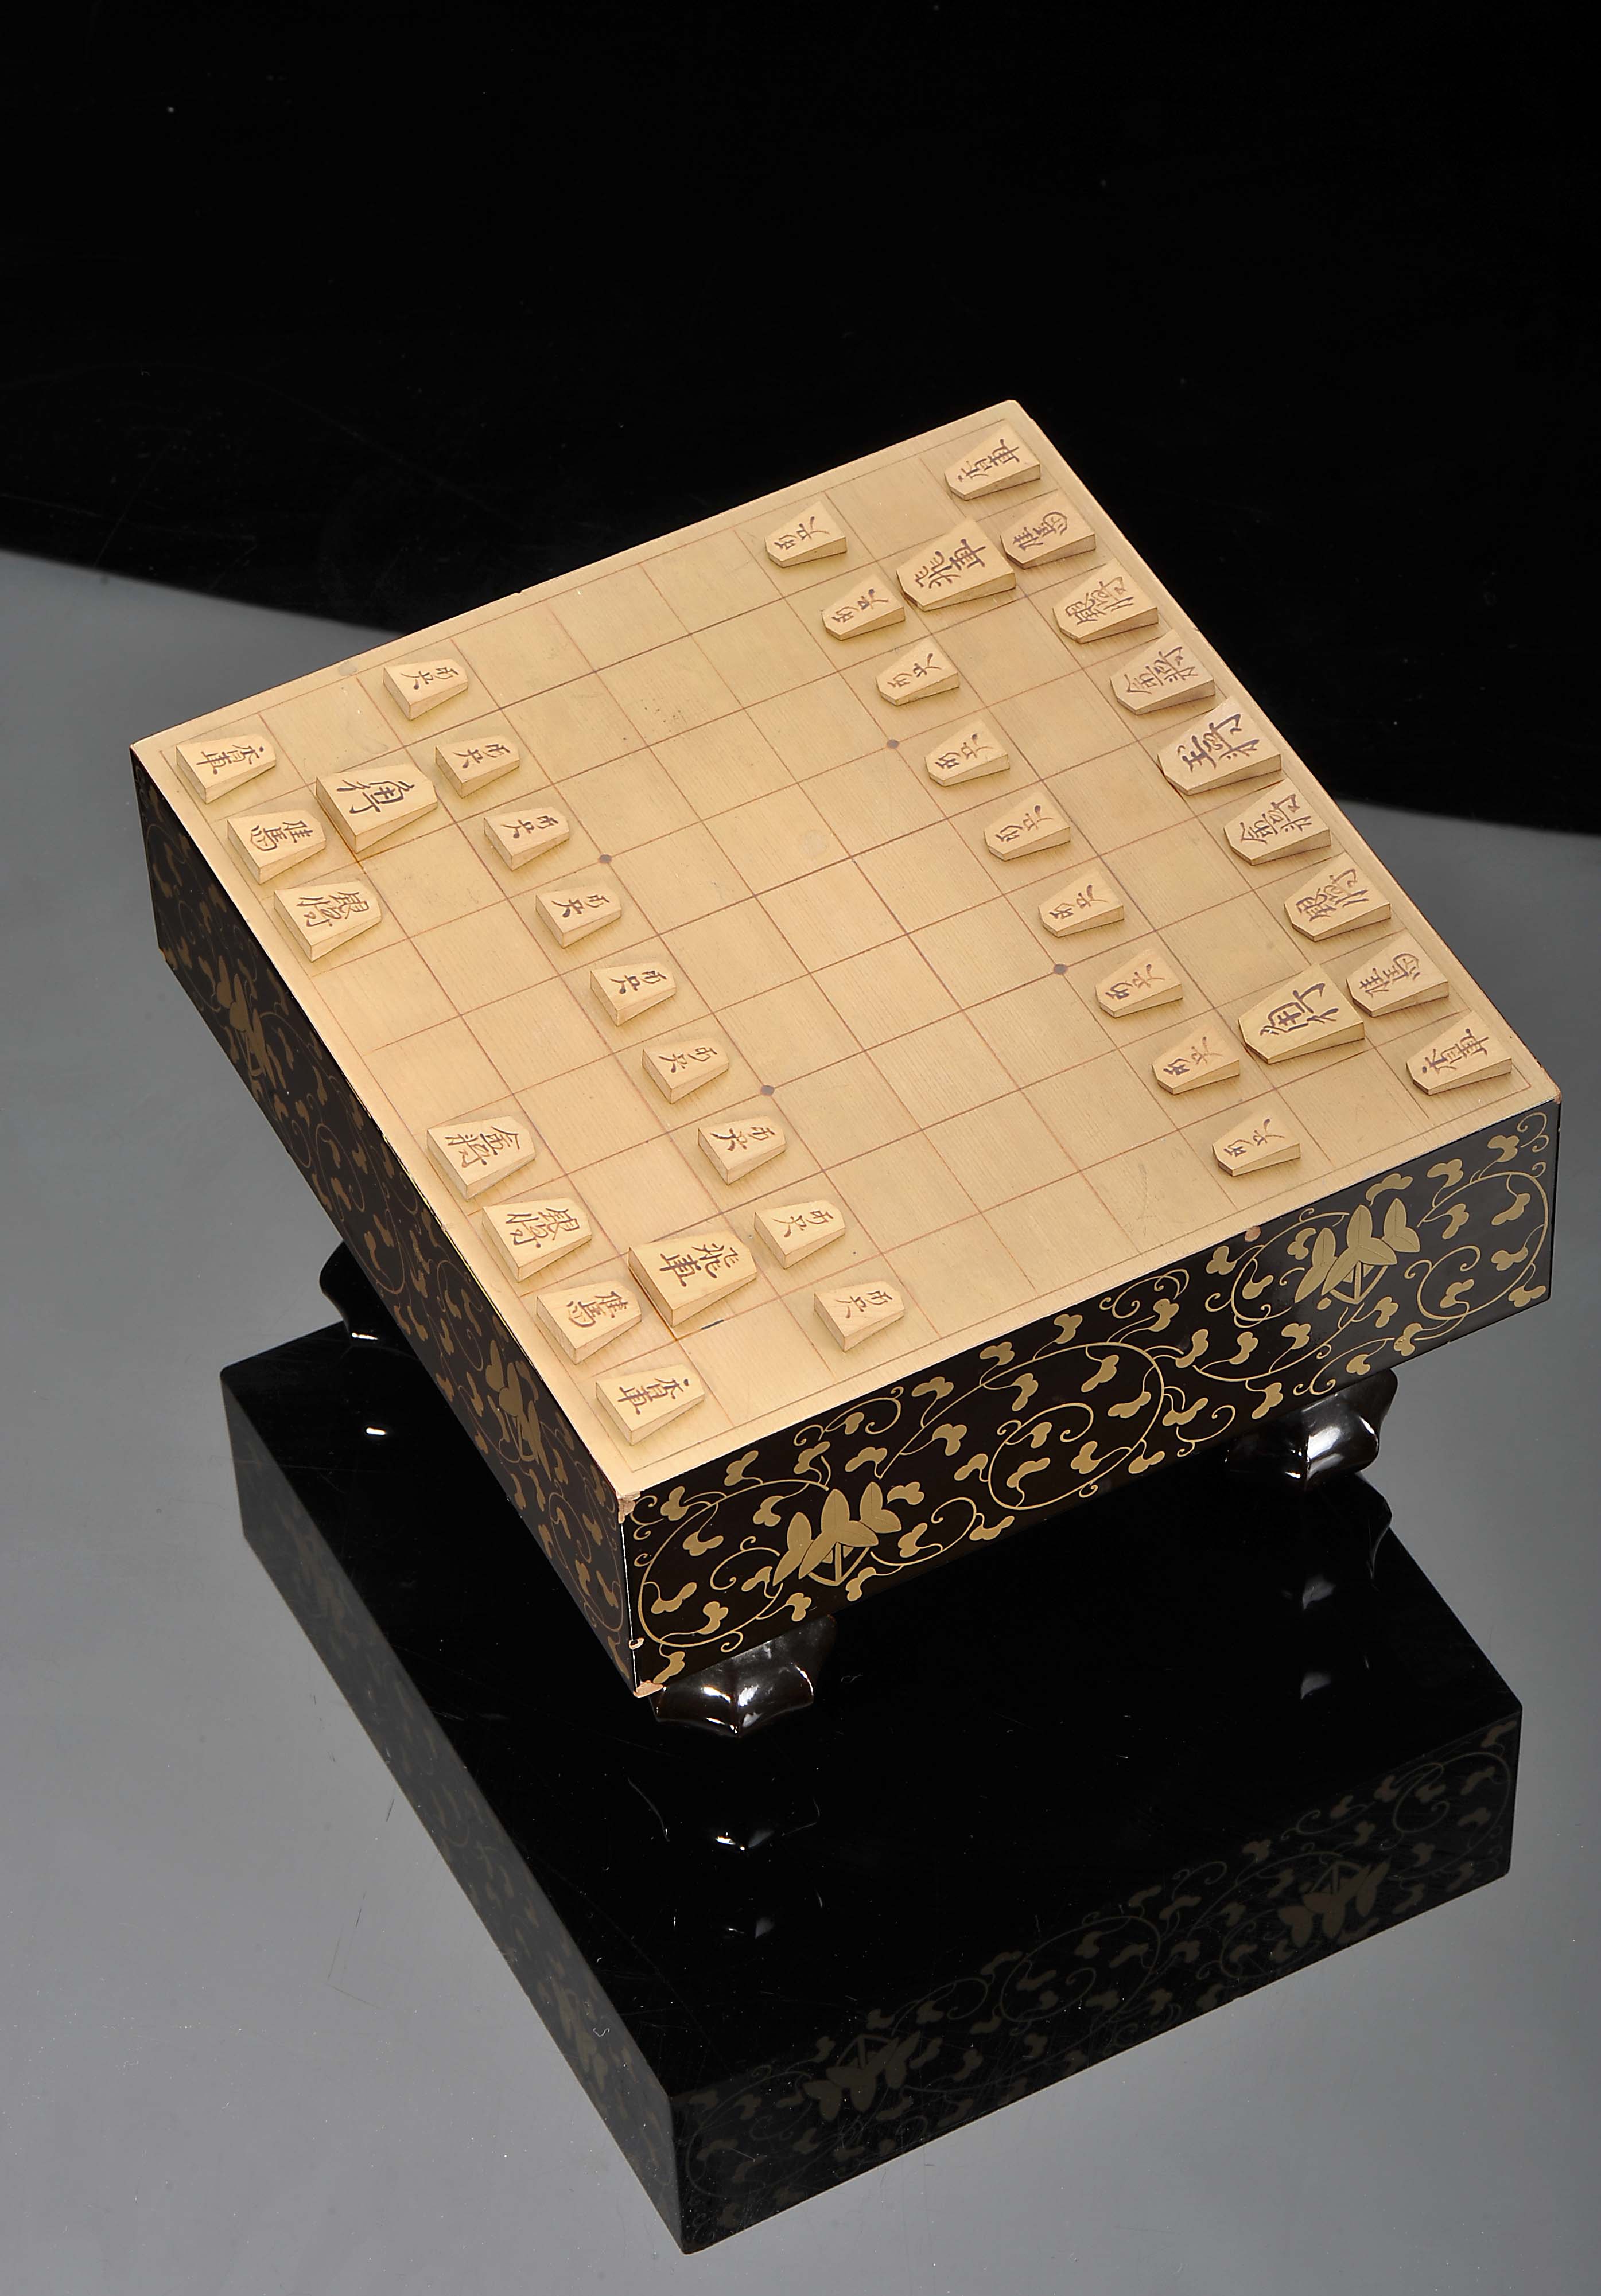 Shogi table/board with forty pieces in "Tomobako" box - Image 4 of 17